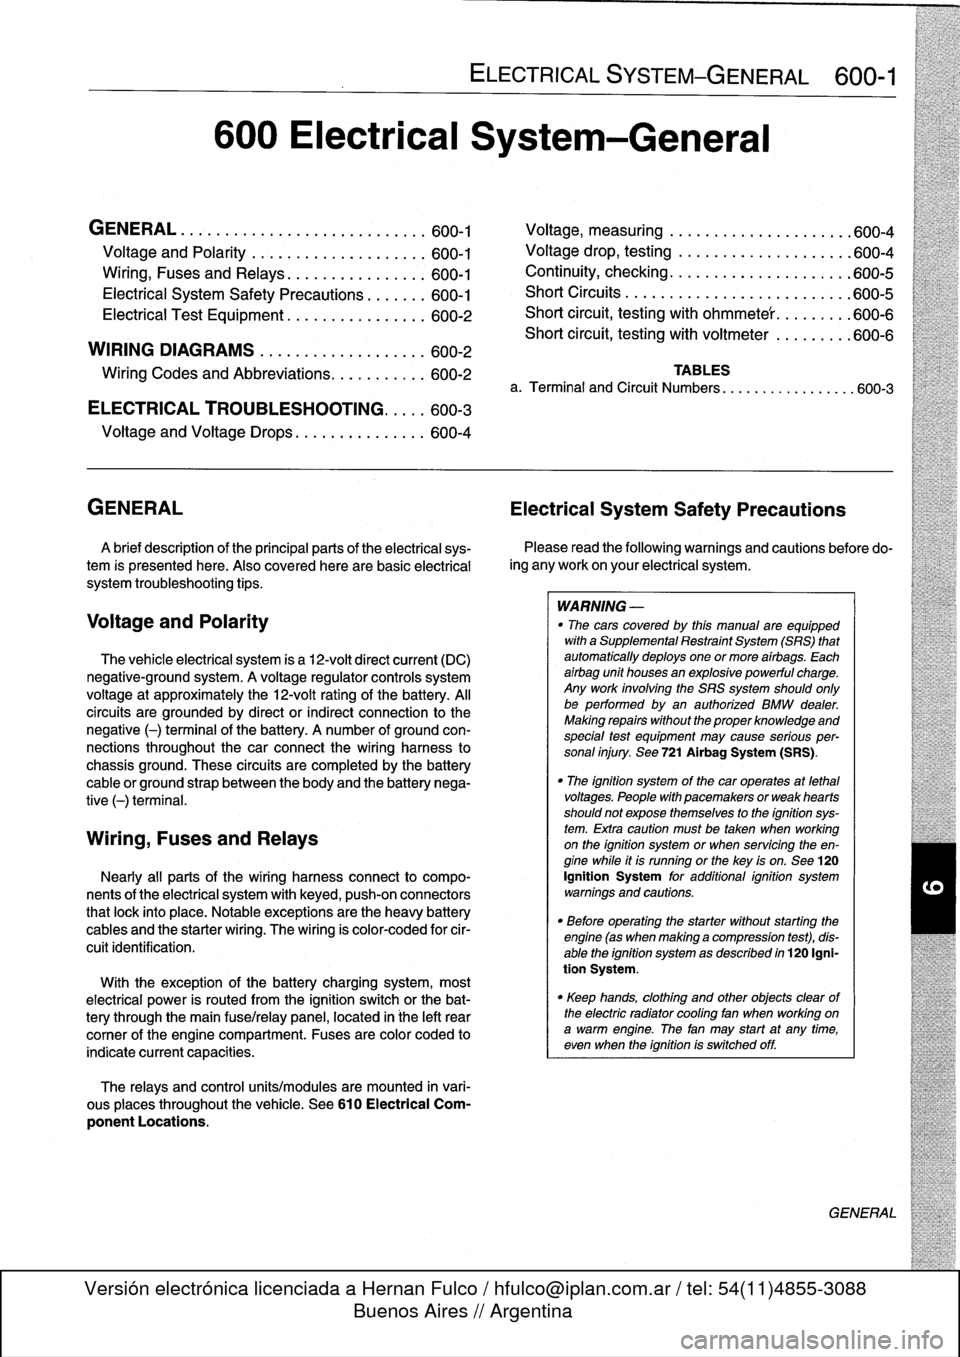 BMW M3 1994 E36 User Guide 
600
Electrical
System-General

GENERAL
.
...........
.
.
.
.
.
.
.
.
.
...
.
...
600-1

Voltage
and
Polarity
........
.
.
.
.
.
.
.
.....
600-1

Ming,
Fuses
and
Relays
............
.
.
.
.
600-1

Ele